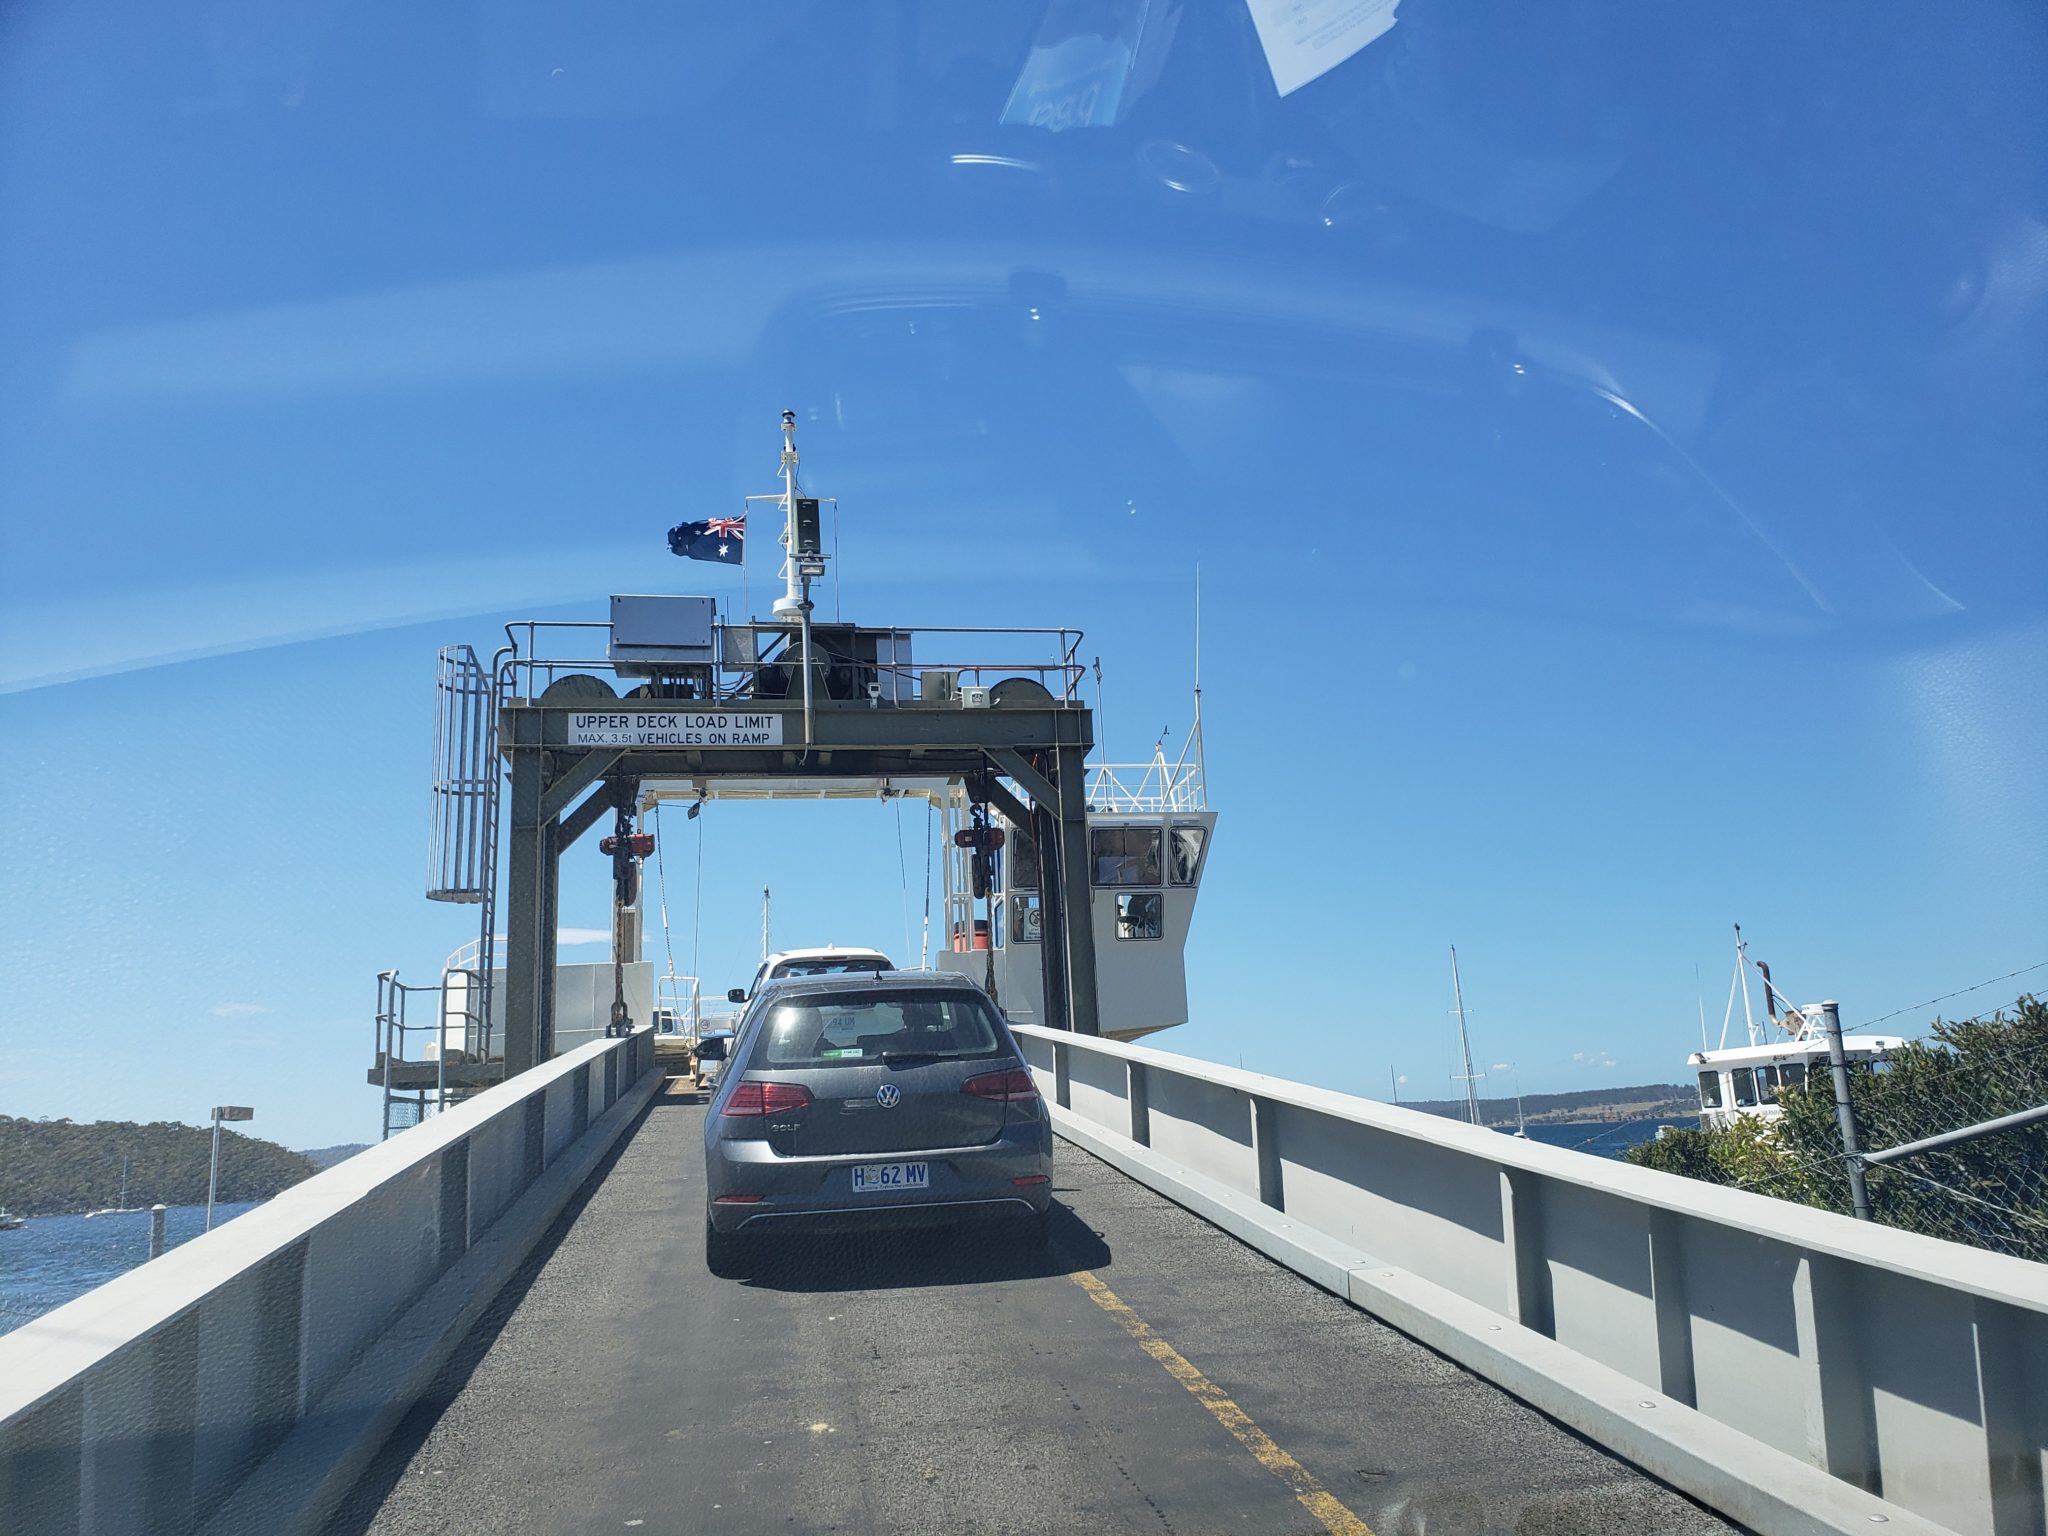 cars on a bridge with a ferry